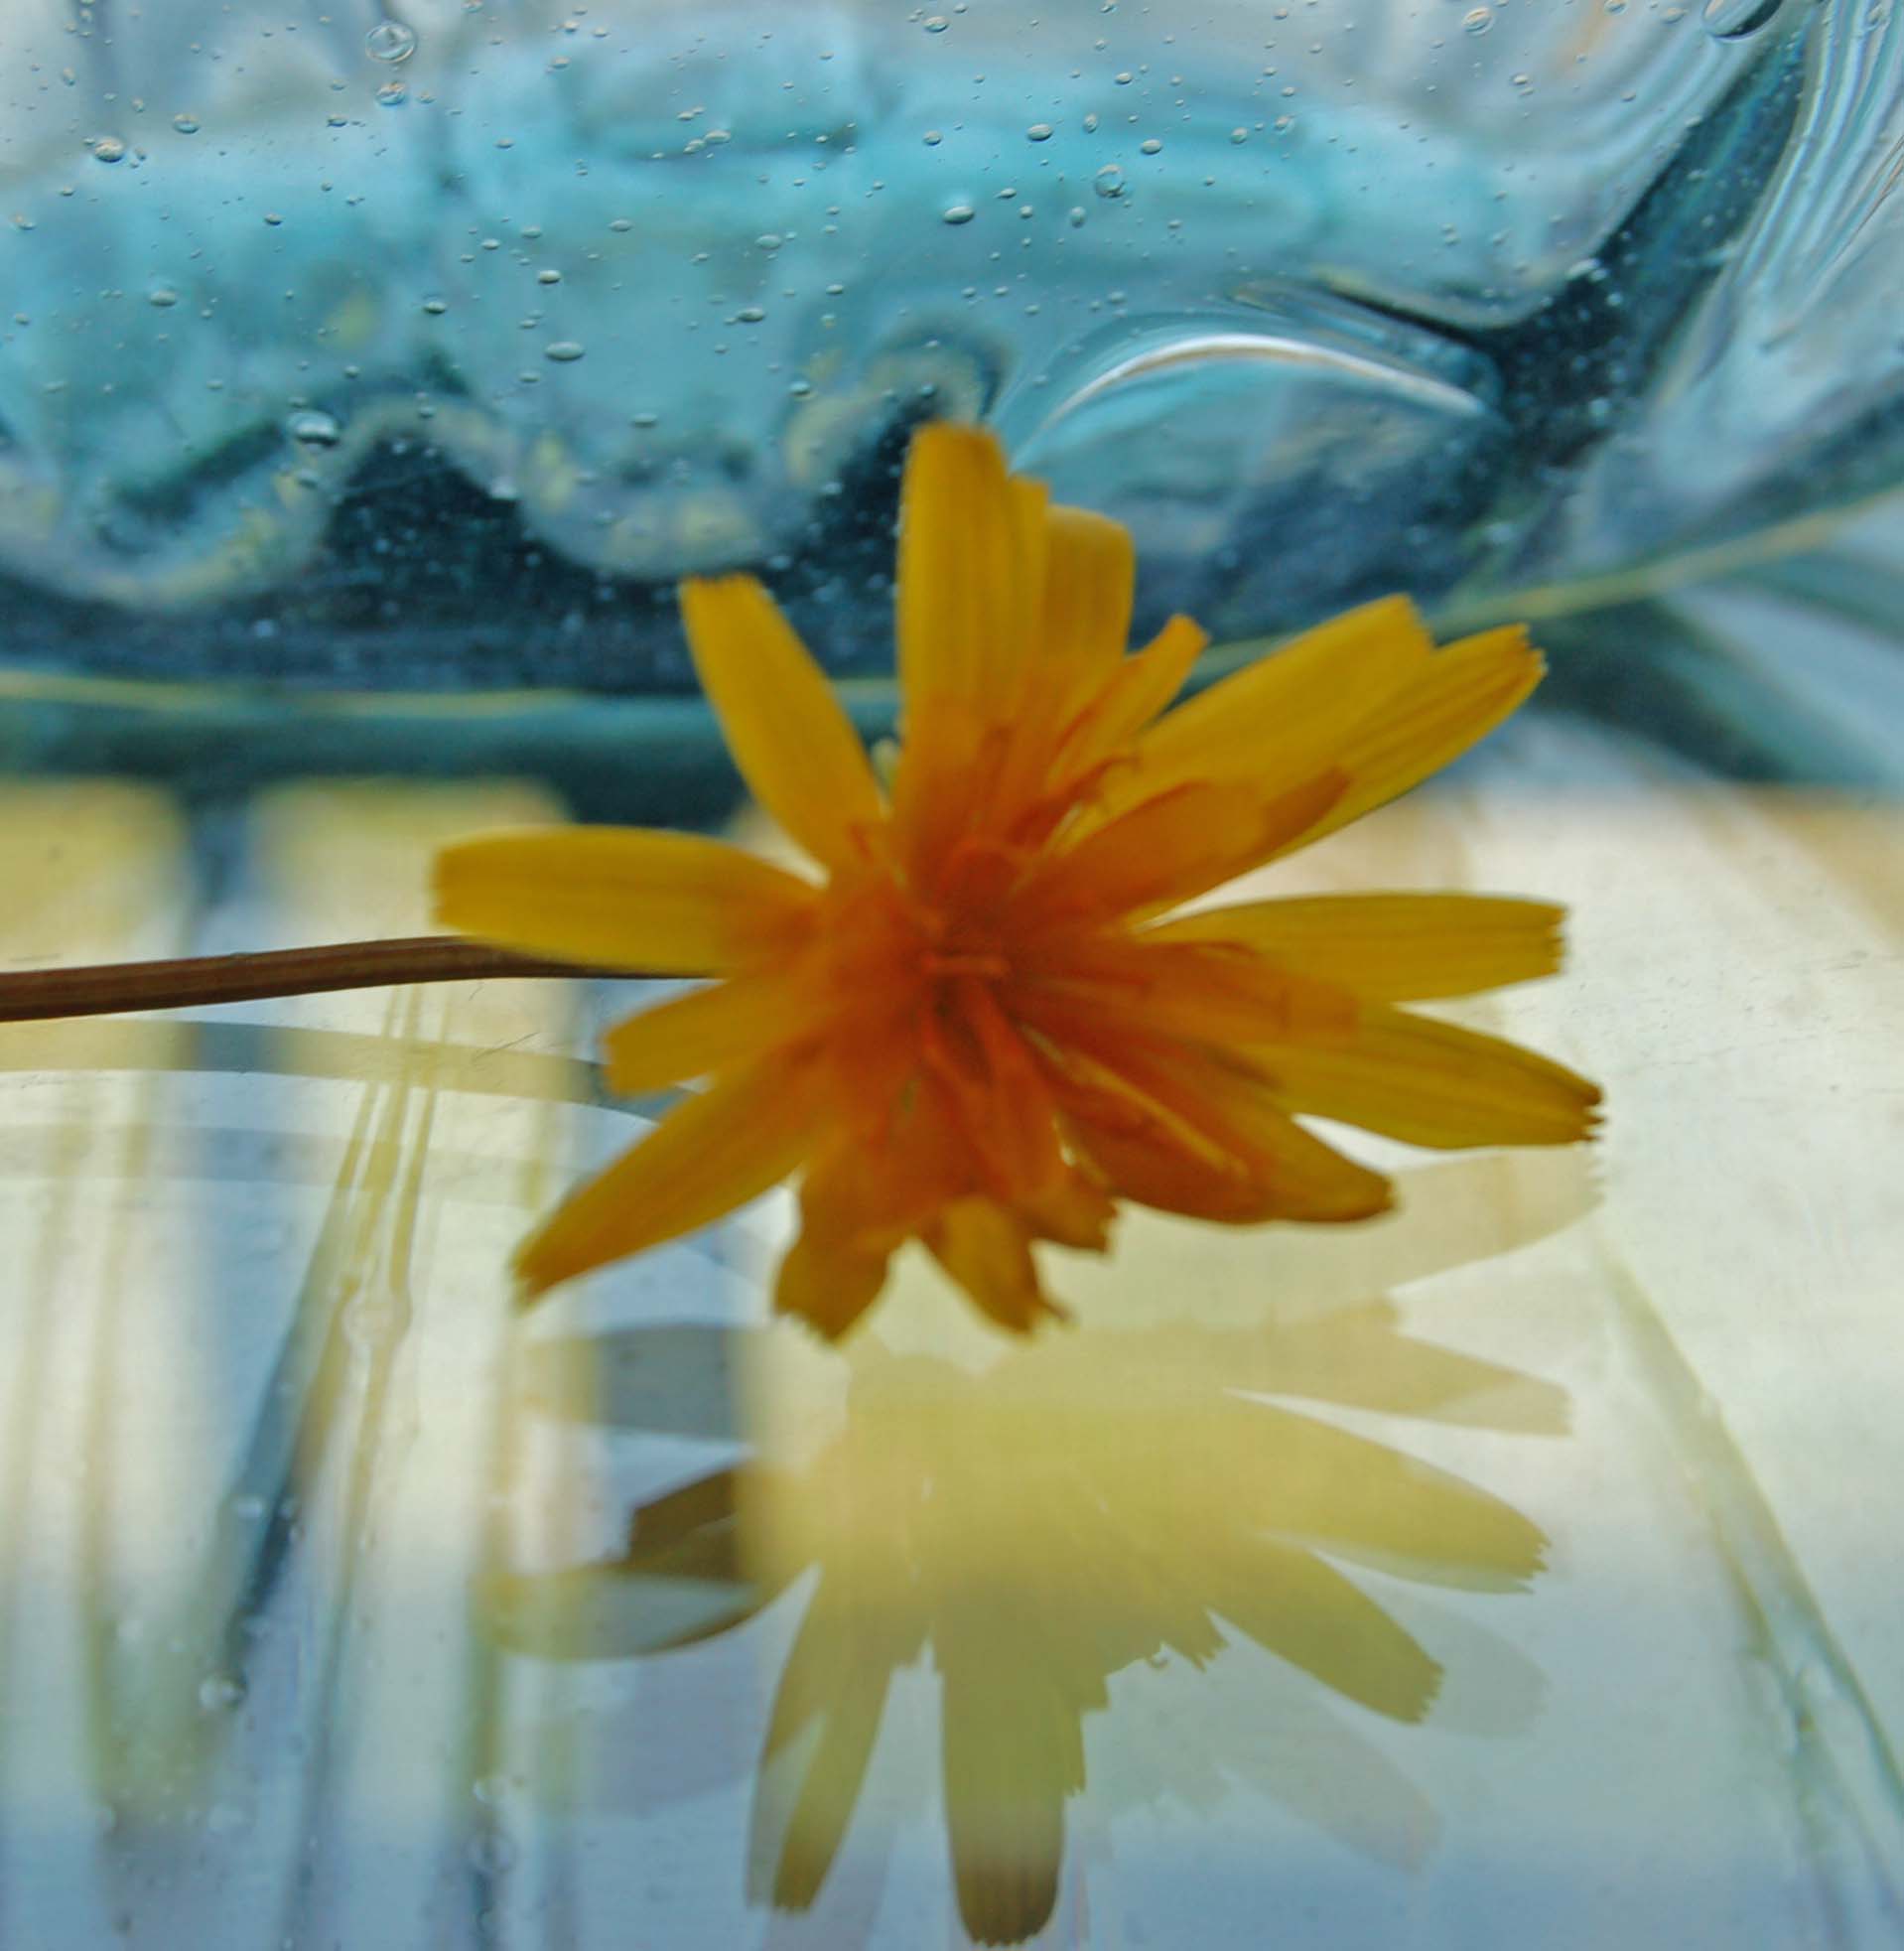 Flower and Vase Reflection